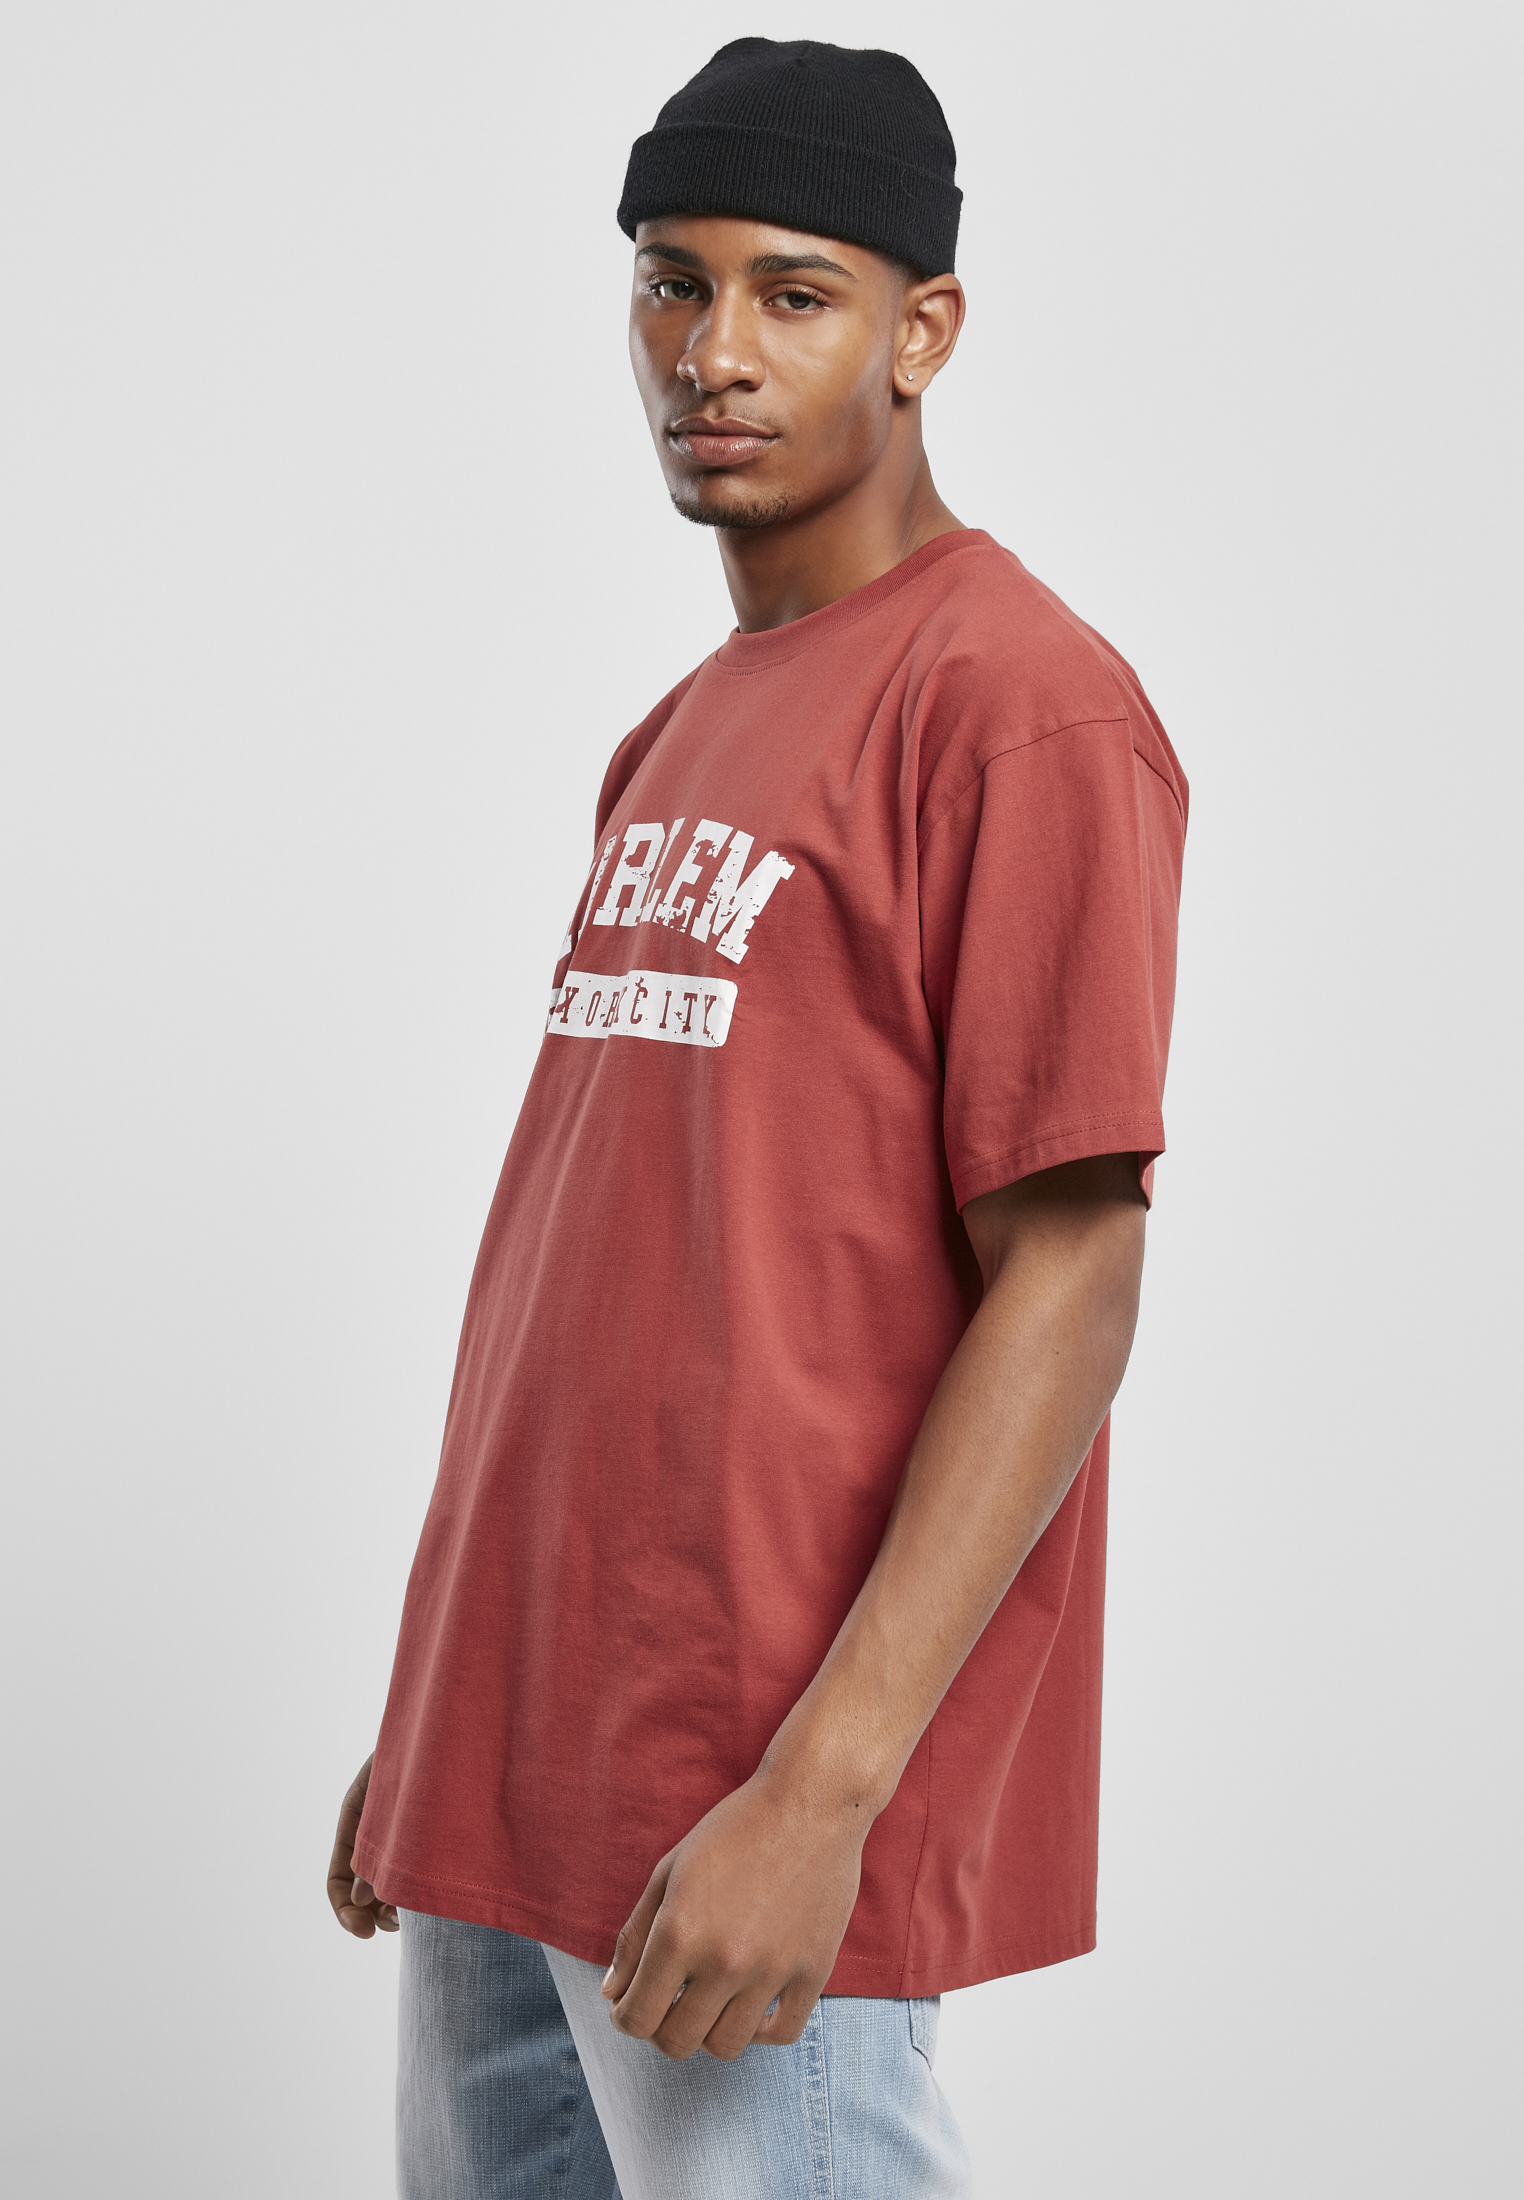 Saisonware Southpole Harlem Tee in Farbe brick red